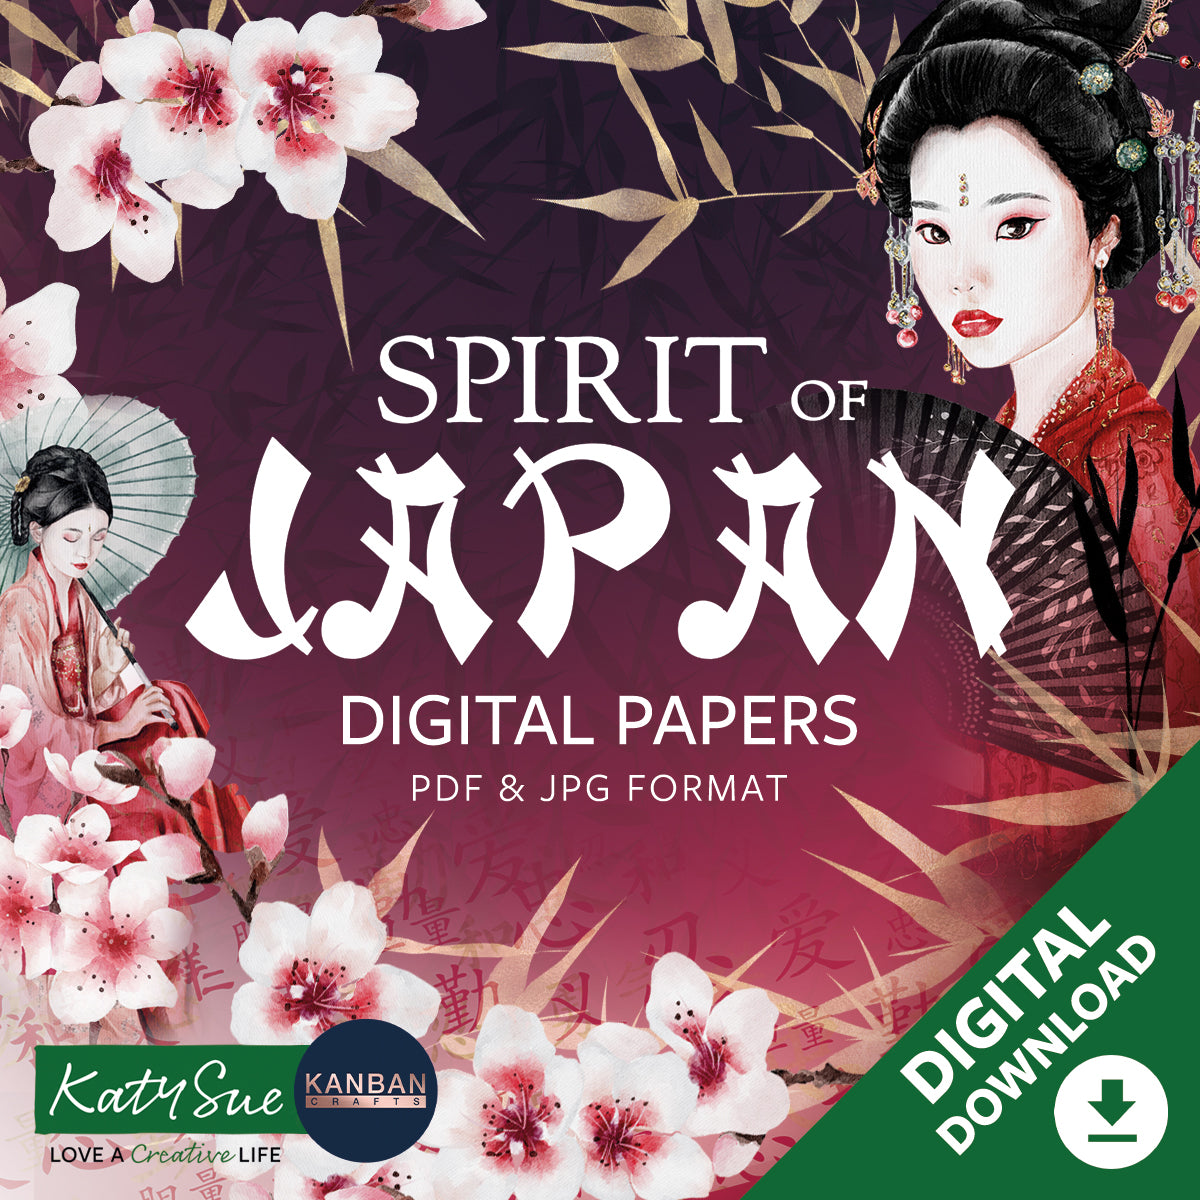 Spirit of Japan Digital Papers Collection